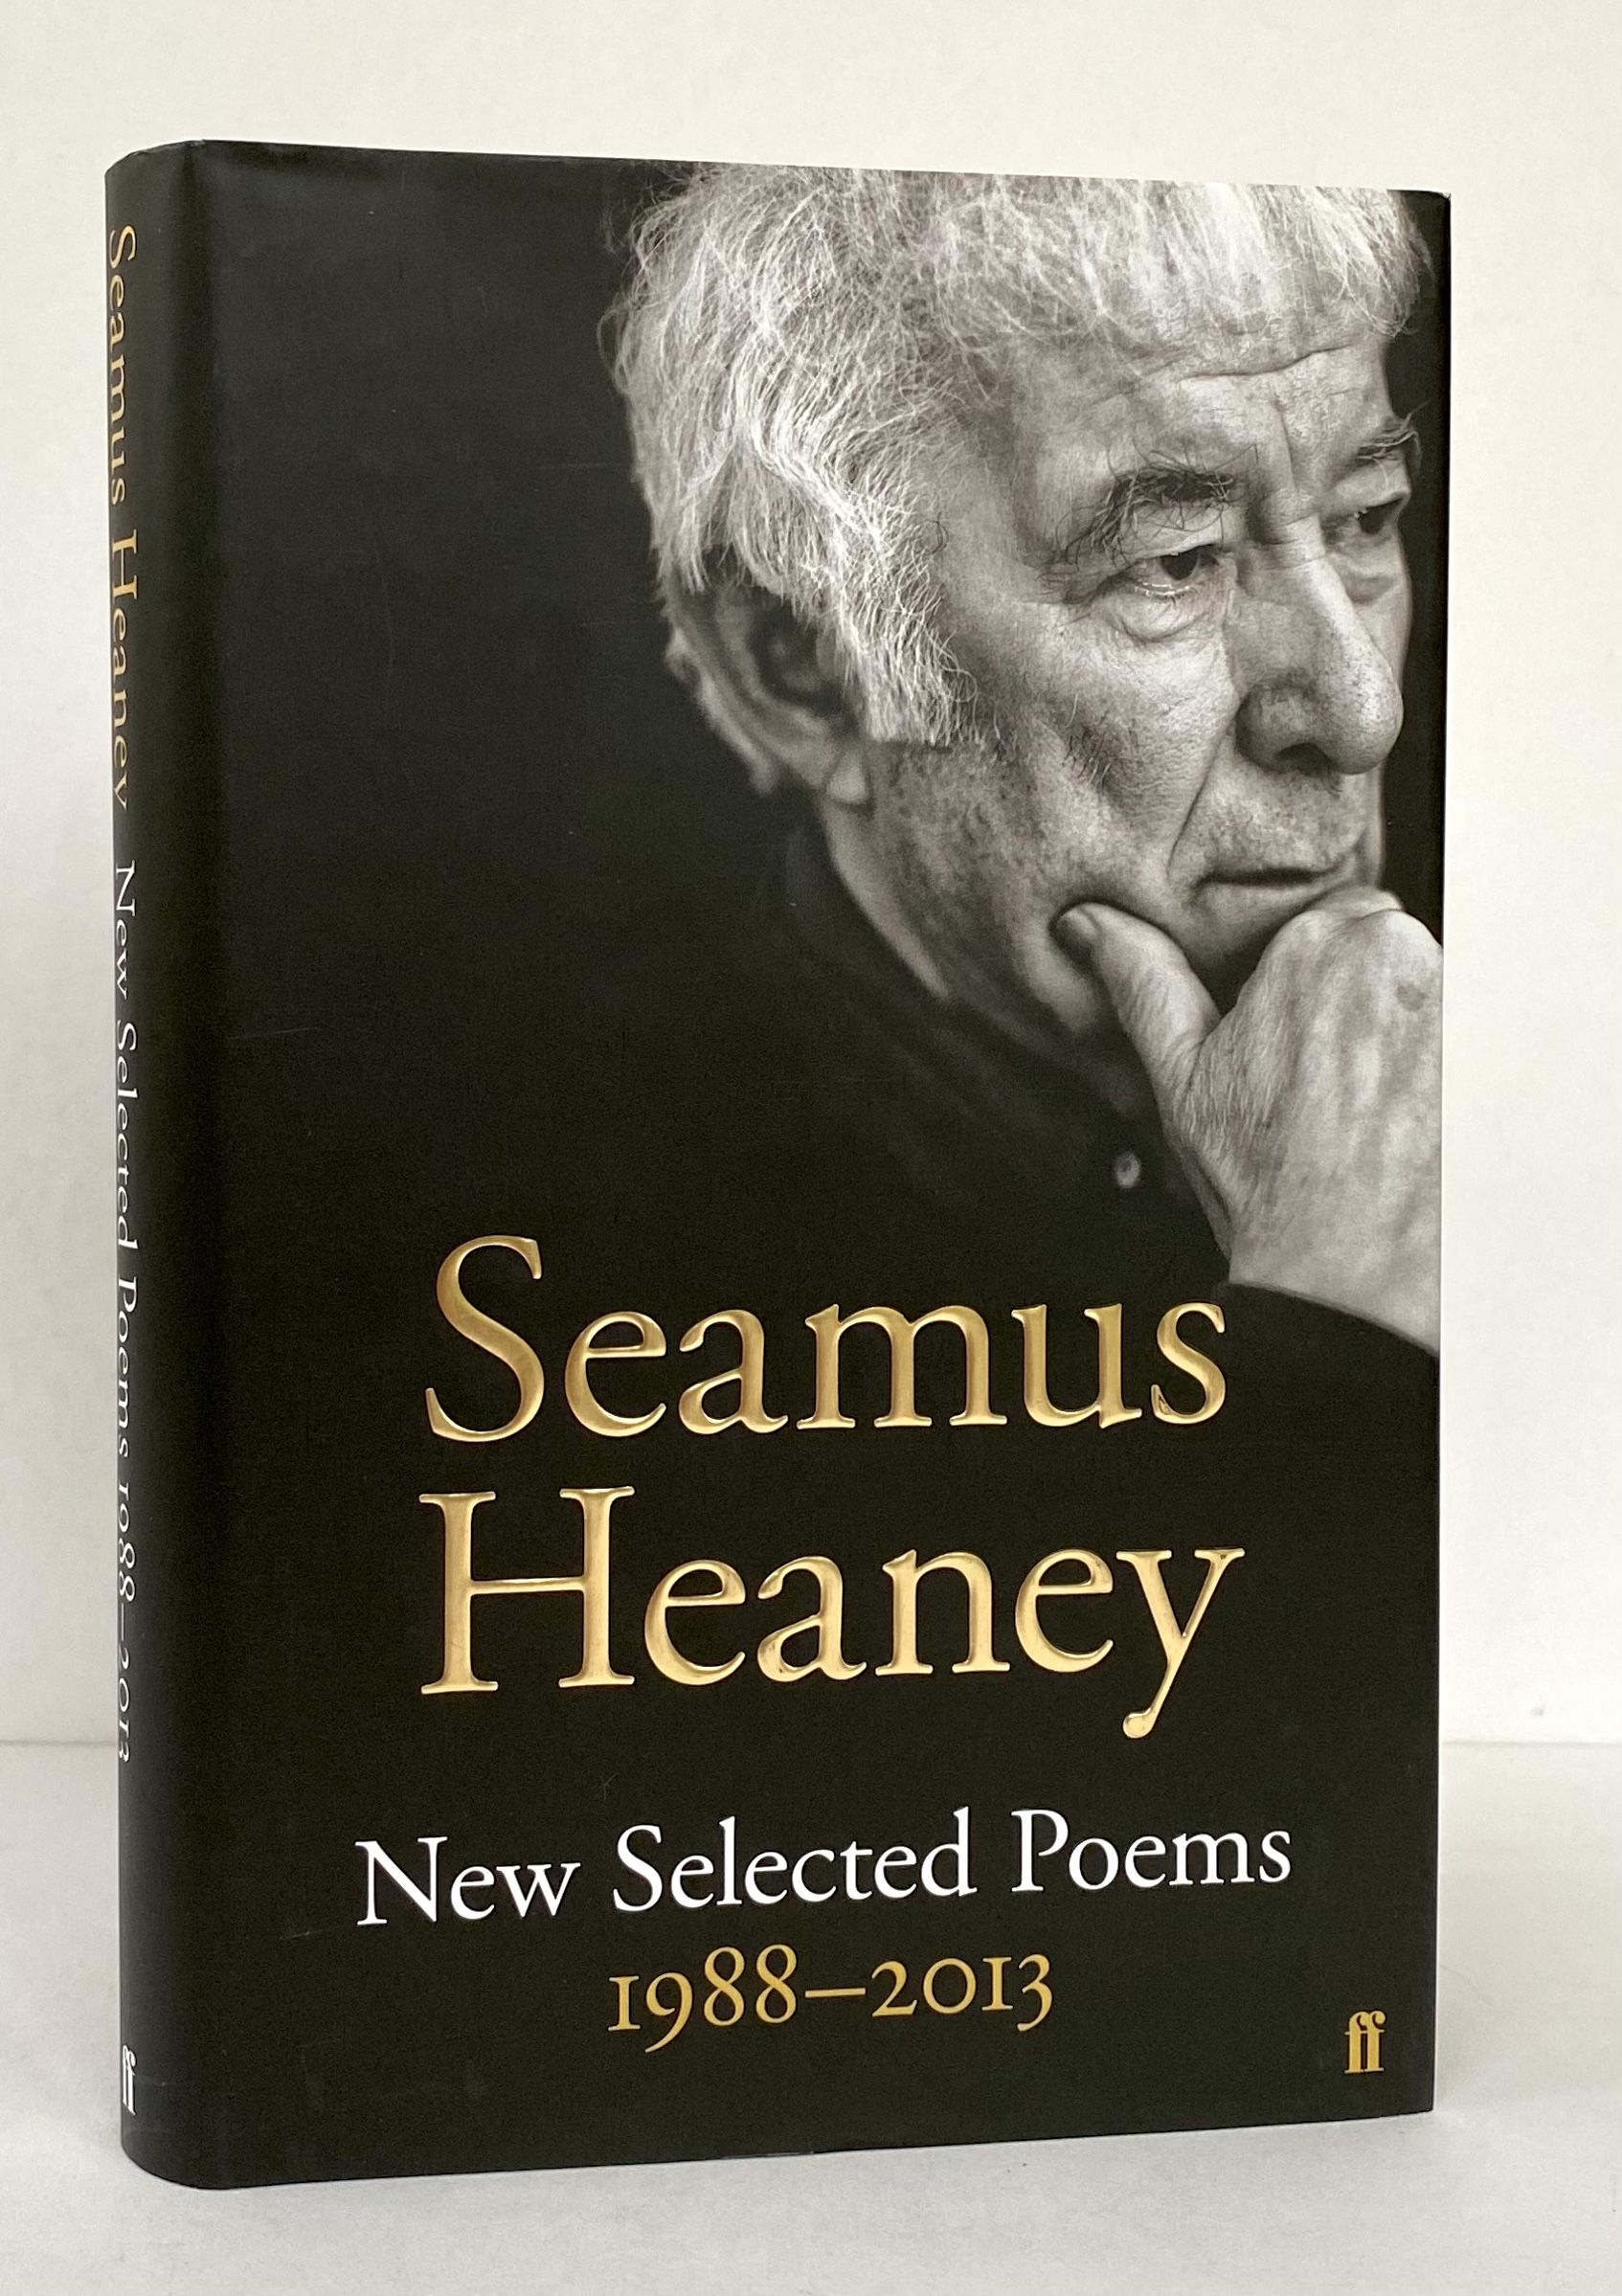 New Selected Poems, 1988-2013 - HEANEY, Seamus